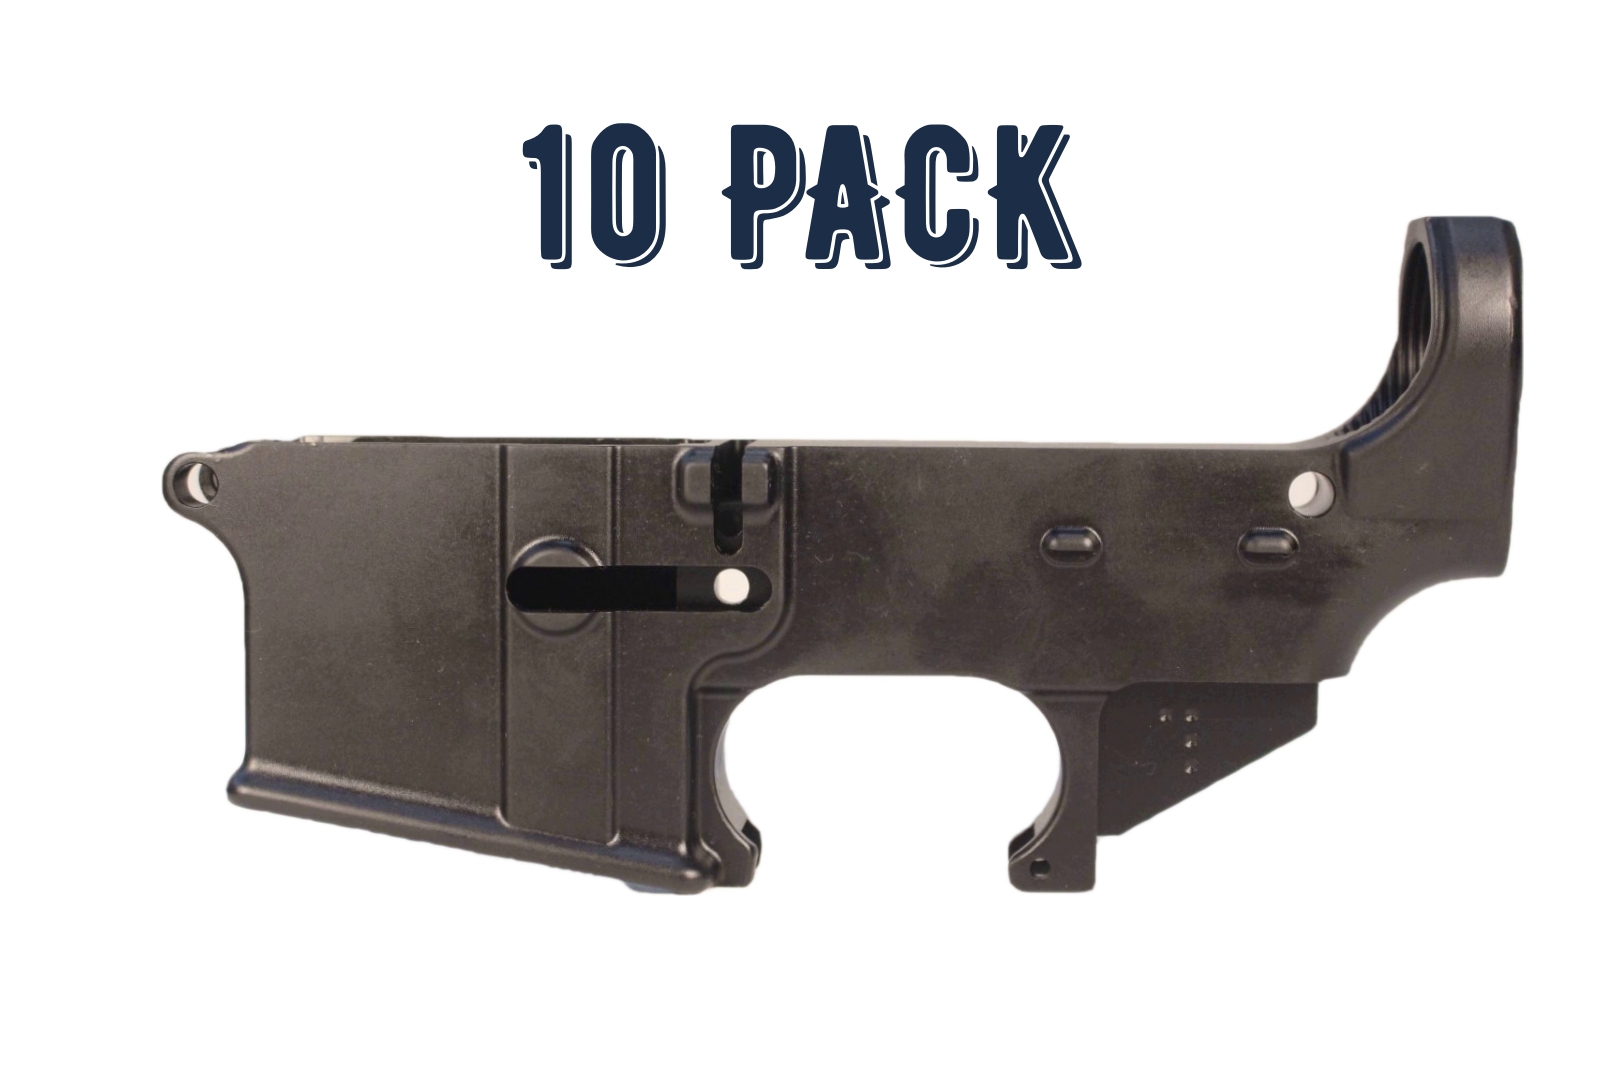 80% AR-15 Lower Receiver - Anodized Black - 10 PACK